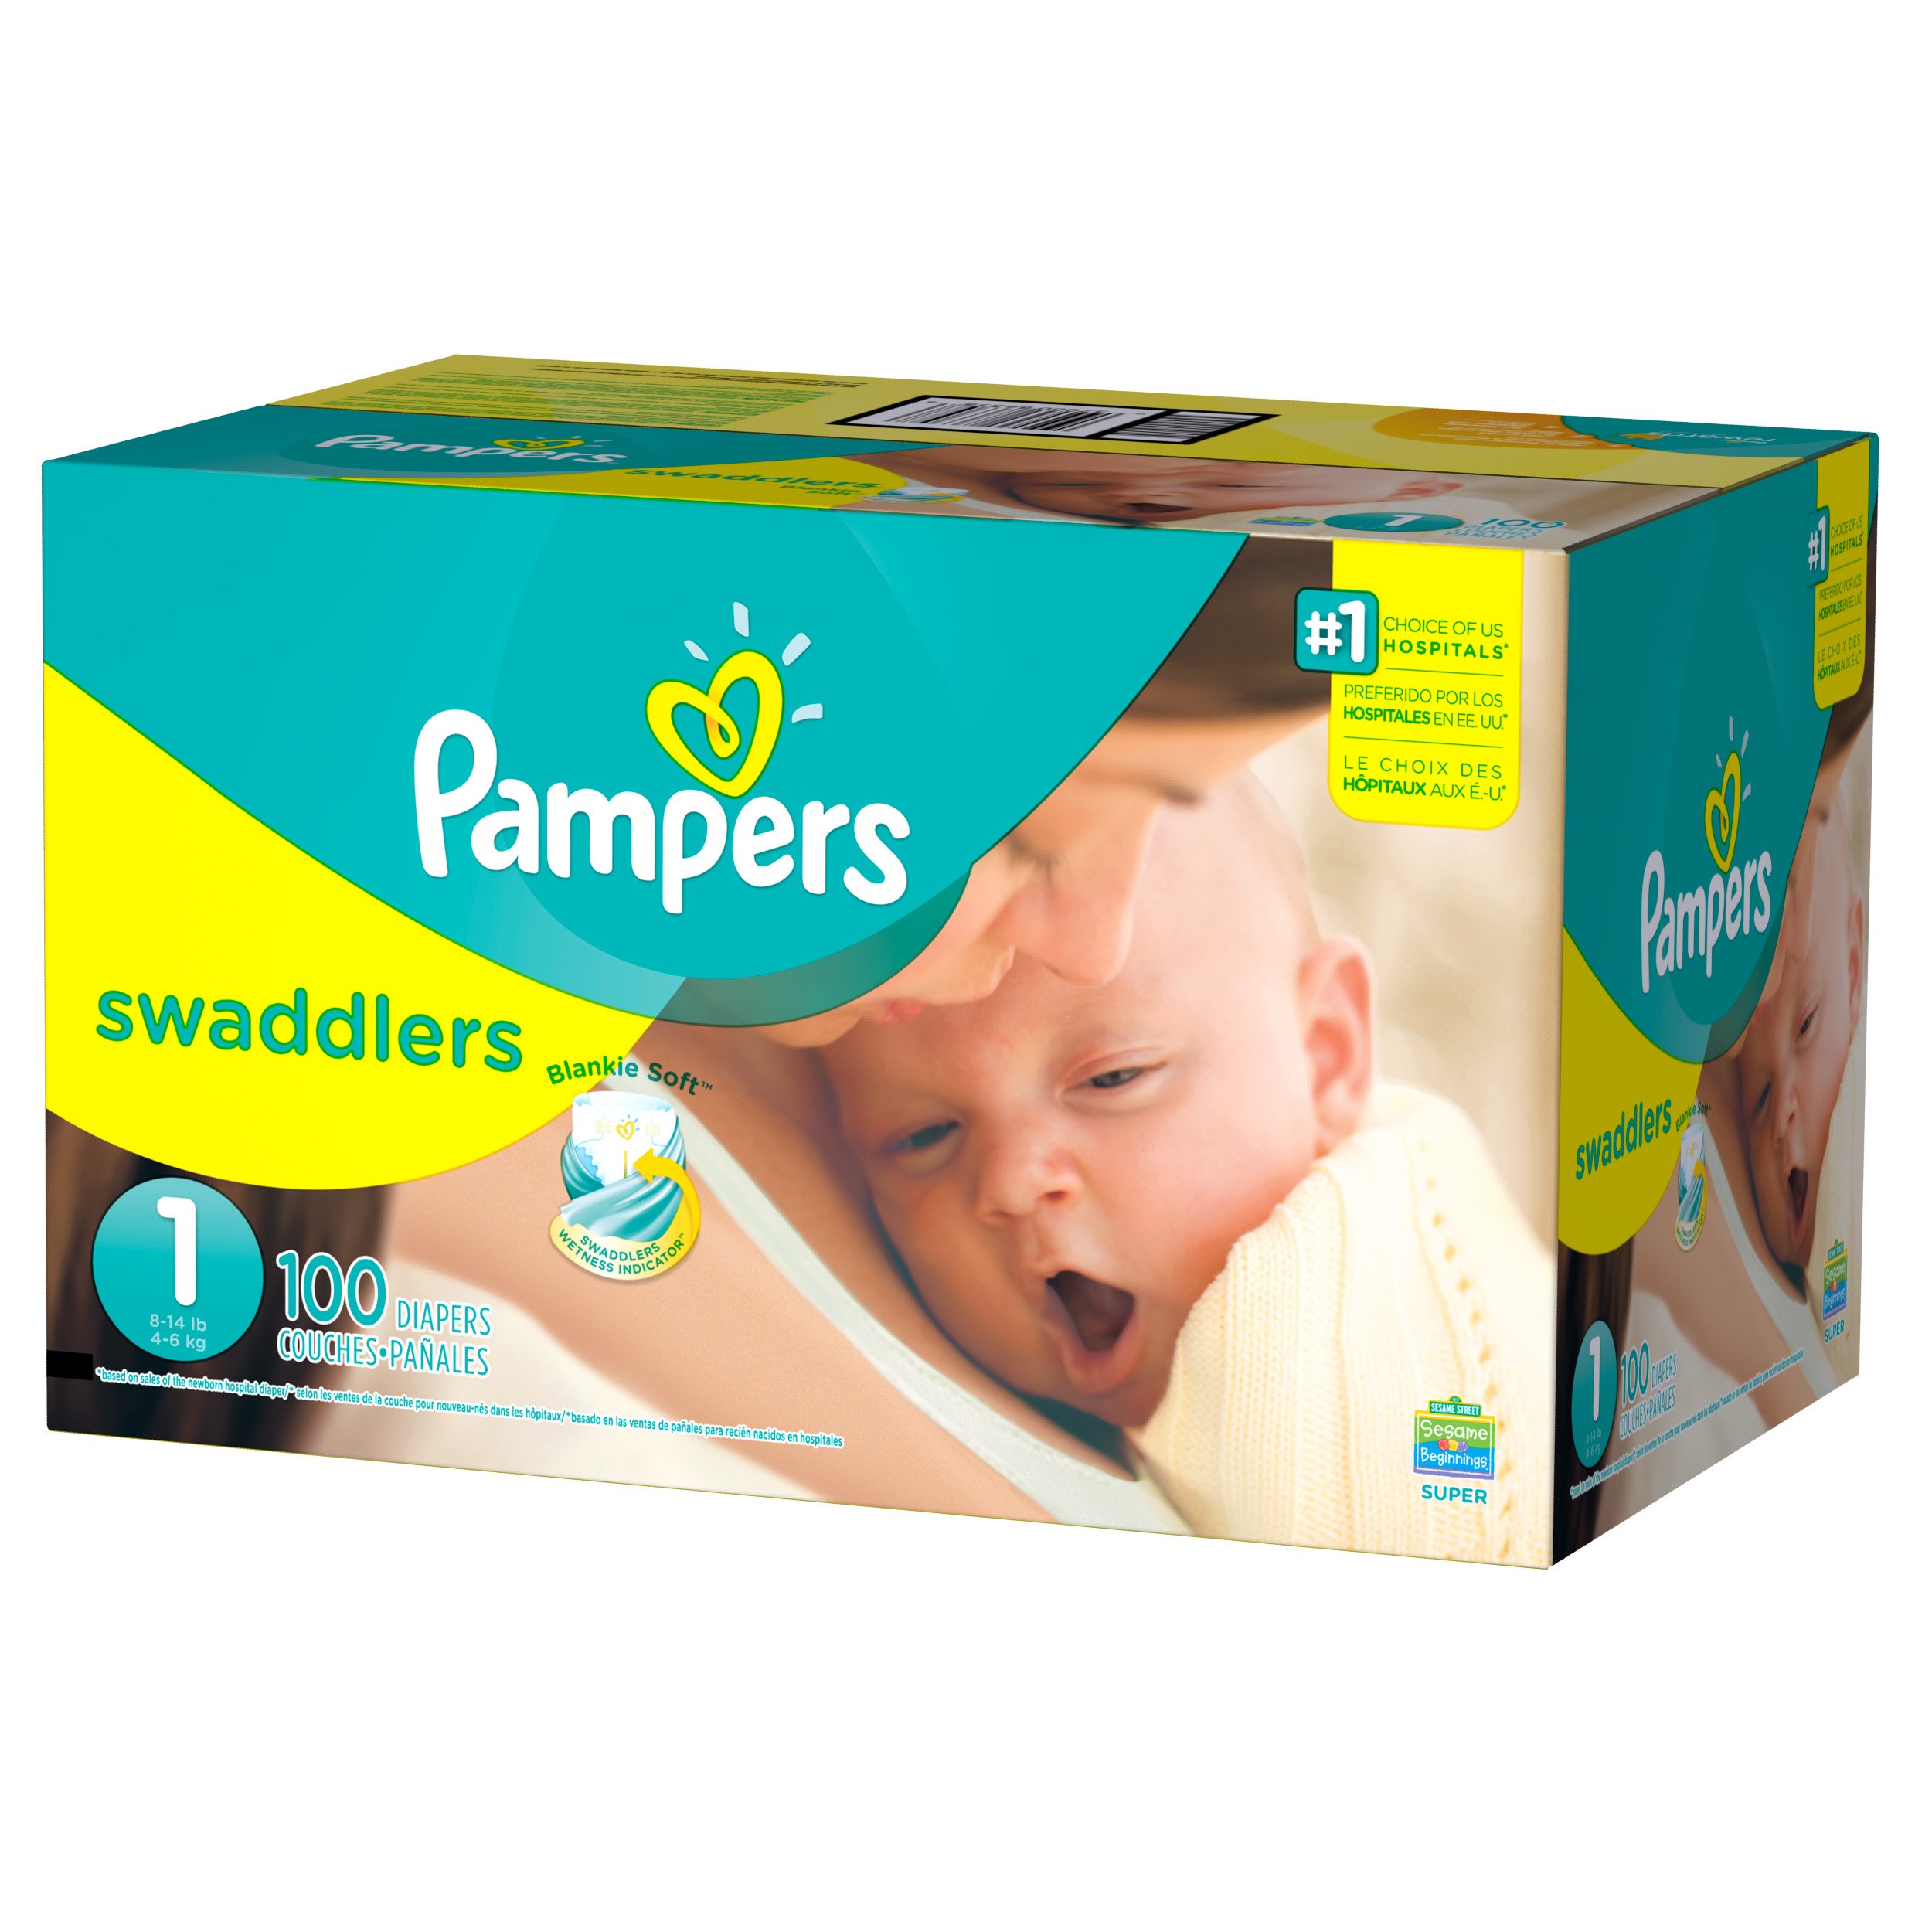 Pampers Swaddlers Newborn Diapers Size 1 100 count ...